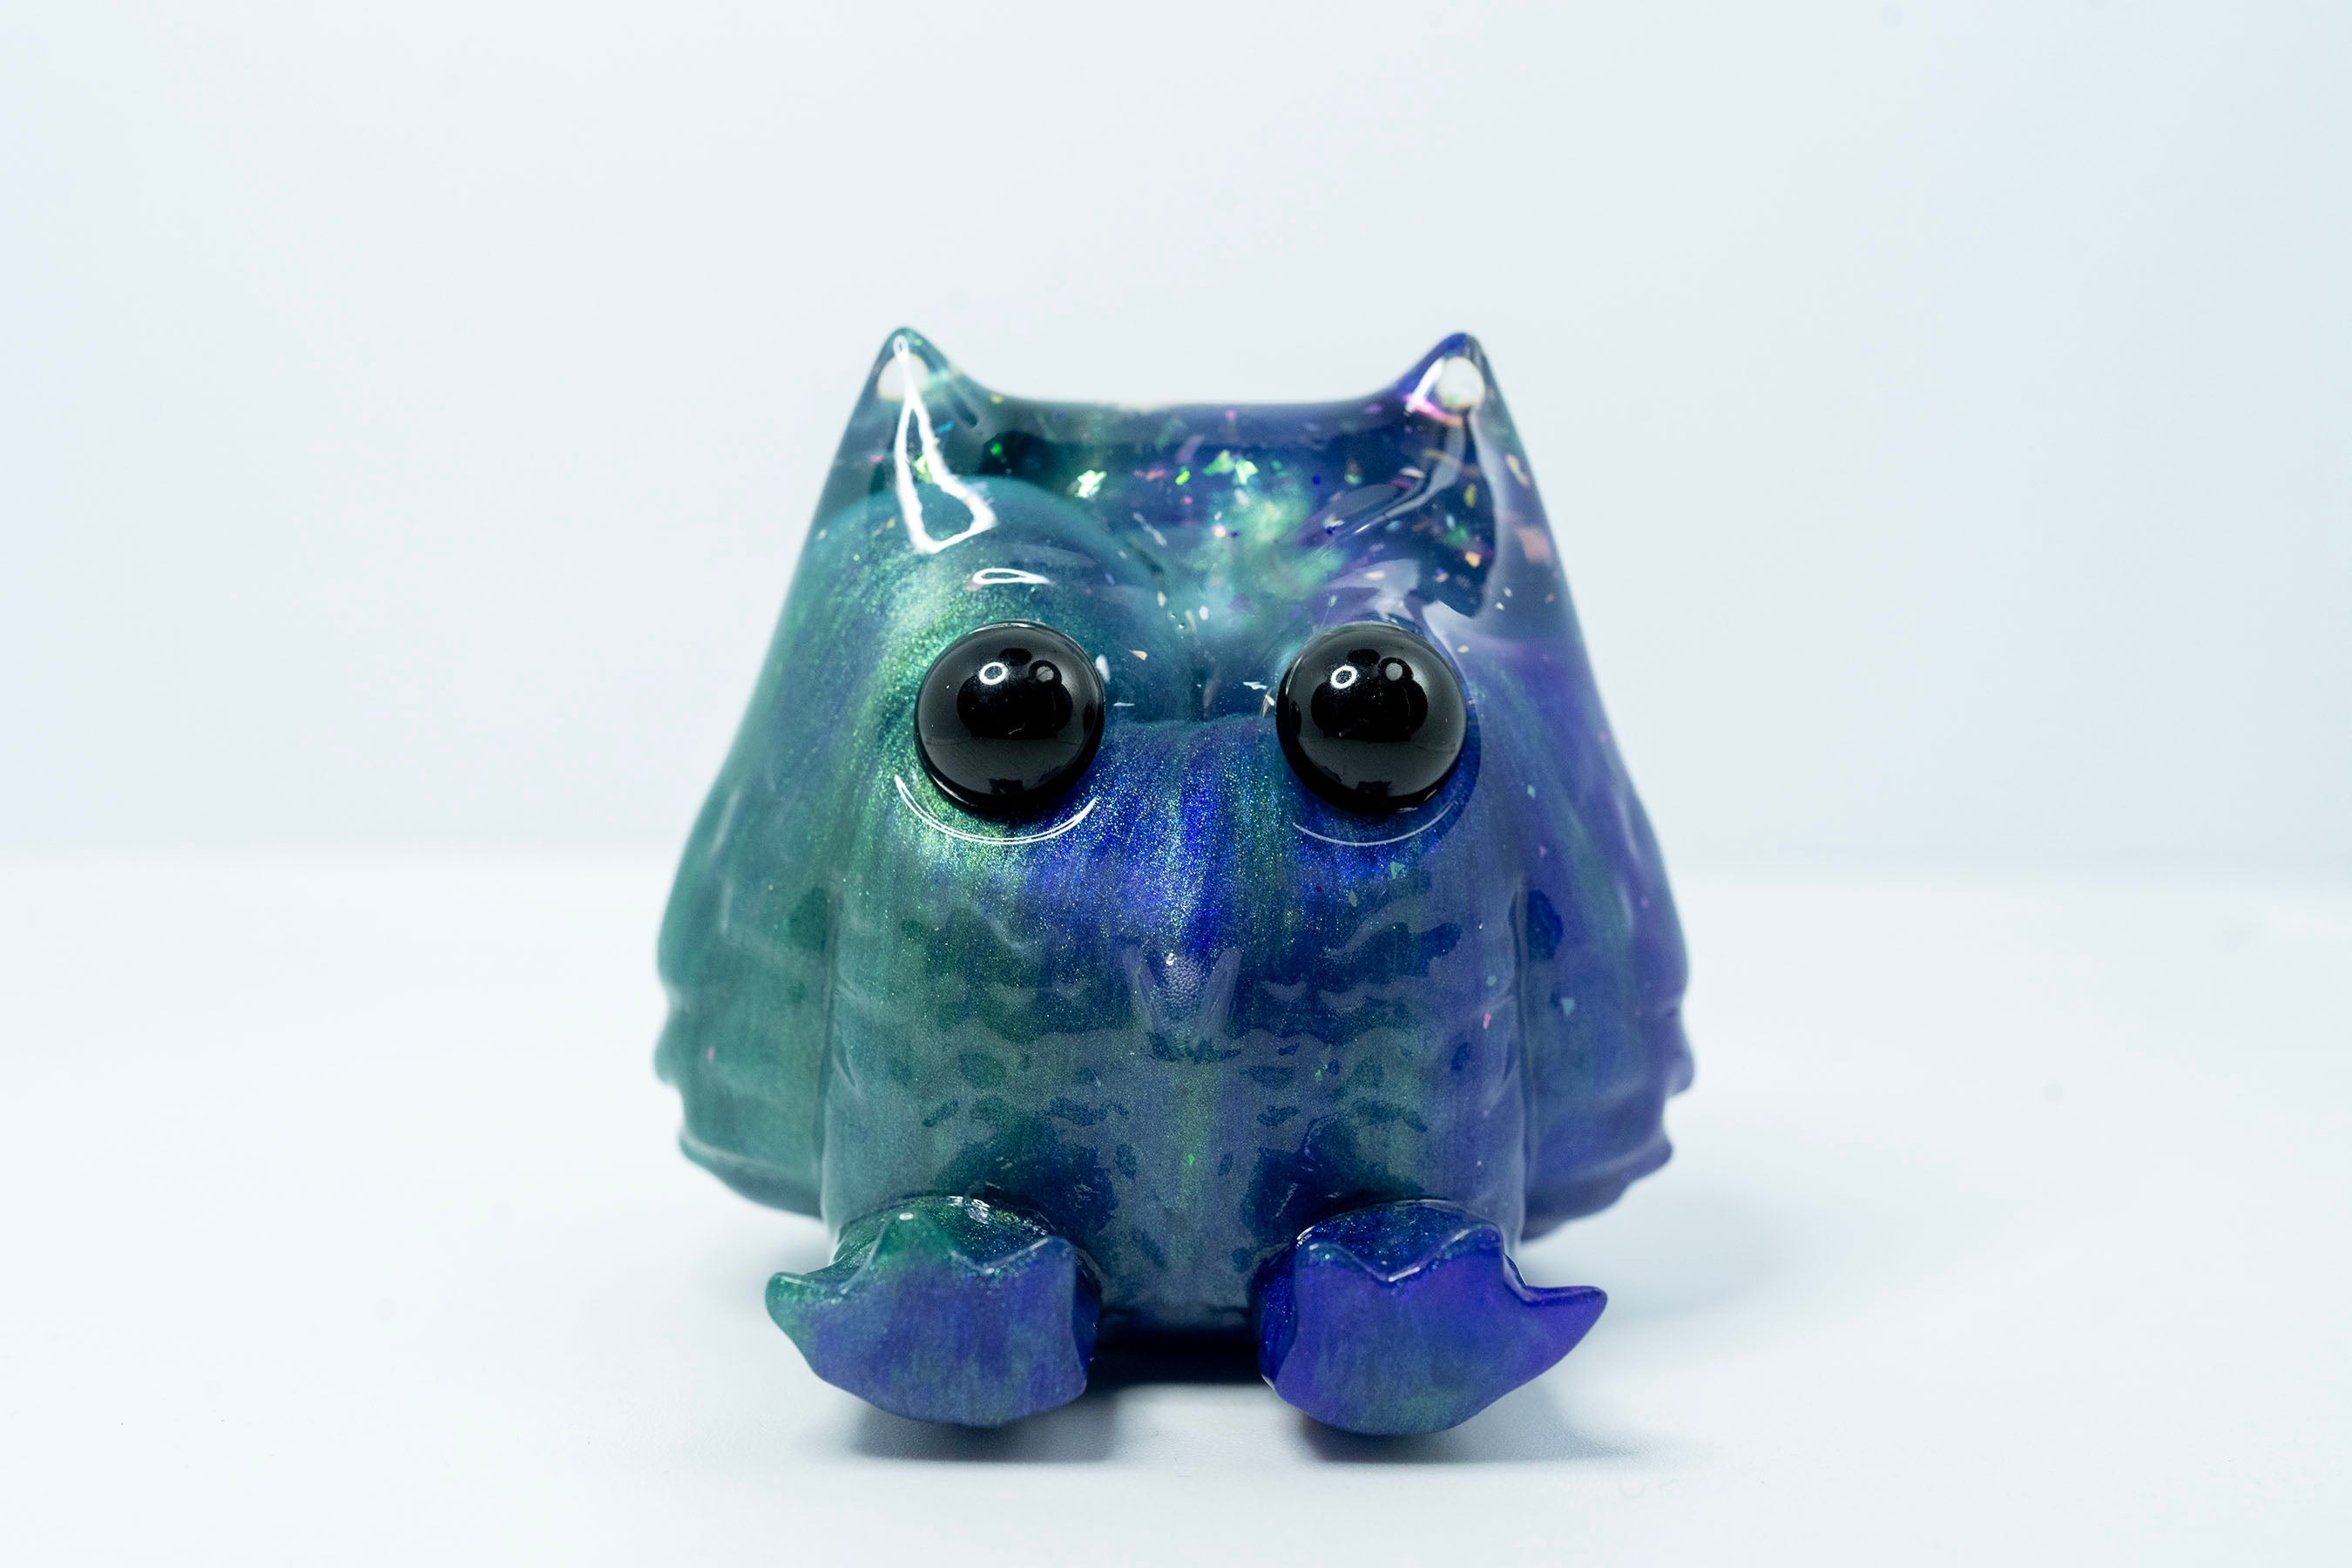 A blind box art toy: Little Shit Big Deal - Sitzend Wyze by House of Wyze. Resin owl figurine, 2.3cm, LE 5 Pieces, ships randomly. Gallery items ship 28 days post-show opening.